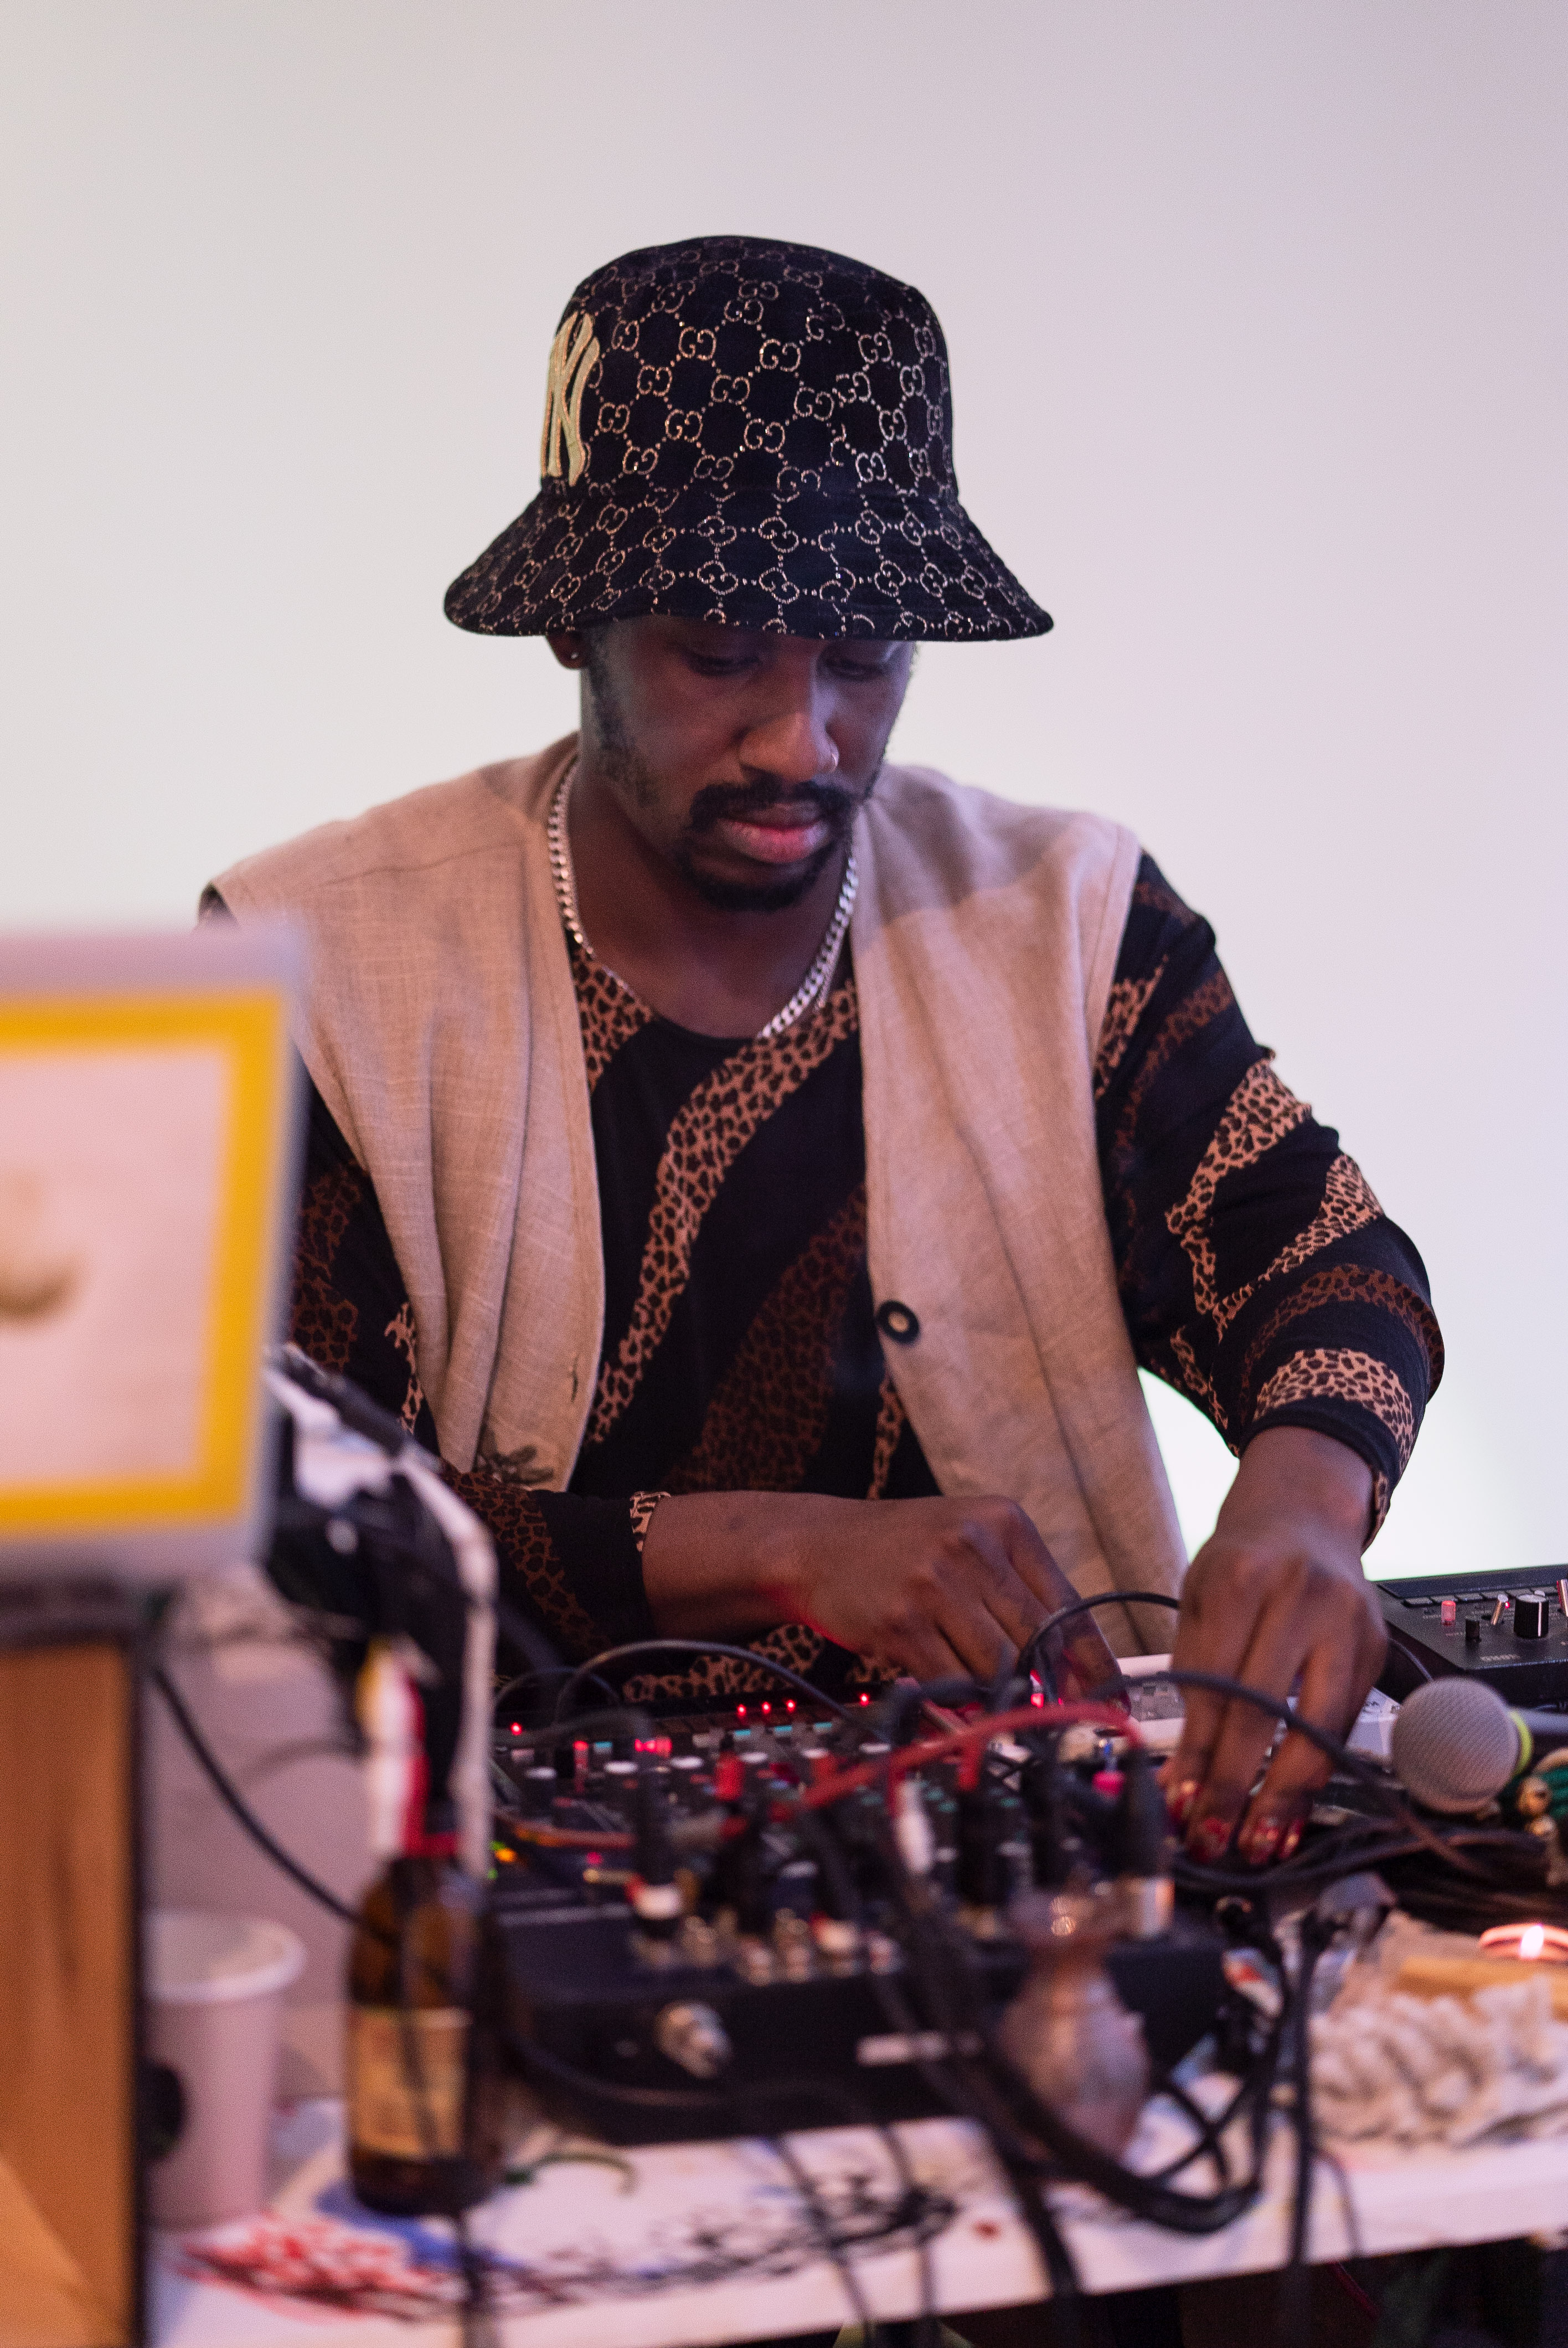 The photo is a medium shot of a person from the front sitting at a DJ table. They are wearing a hat and a traditional vest. In the foreground and out of focus we see equipment, cables and a microphone. The person operates equipment for DJing.